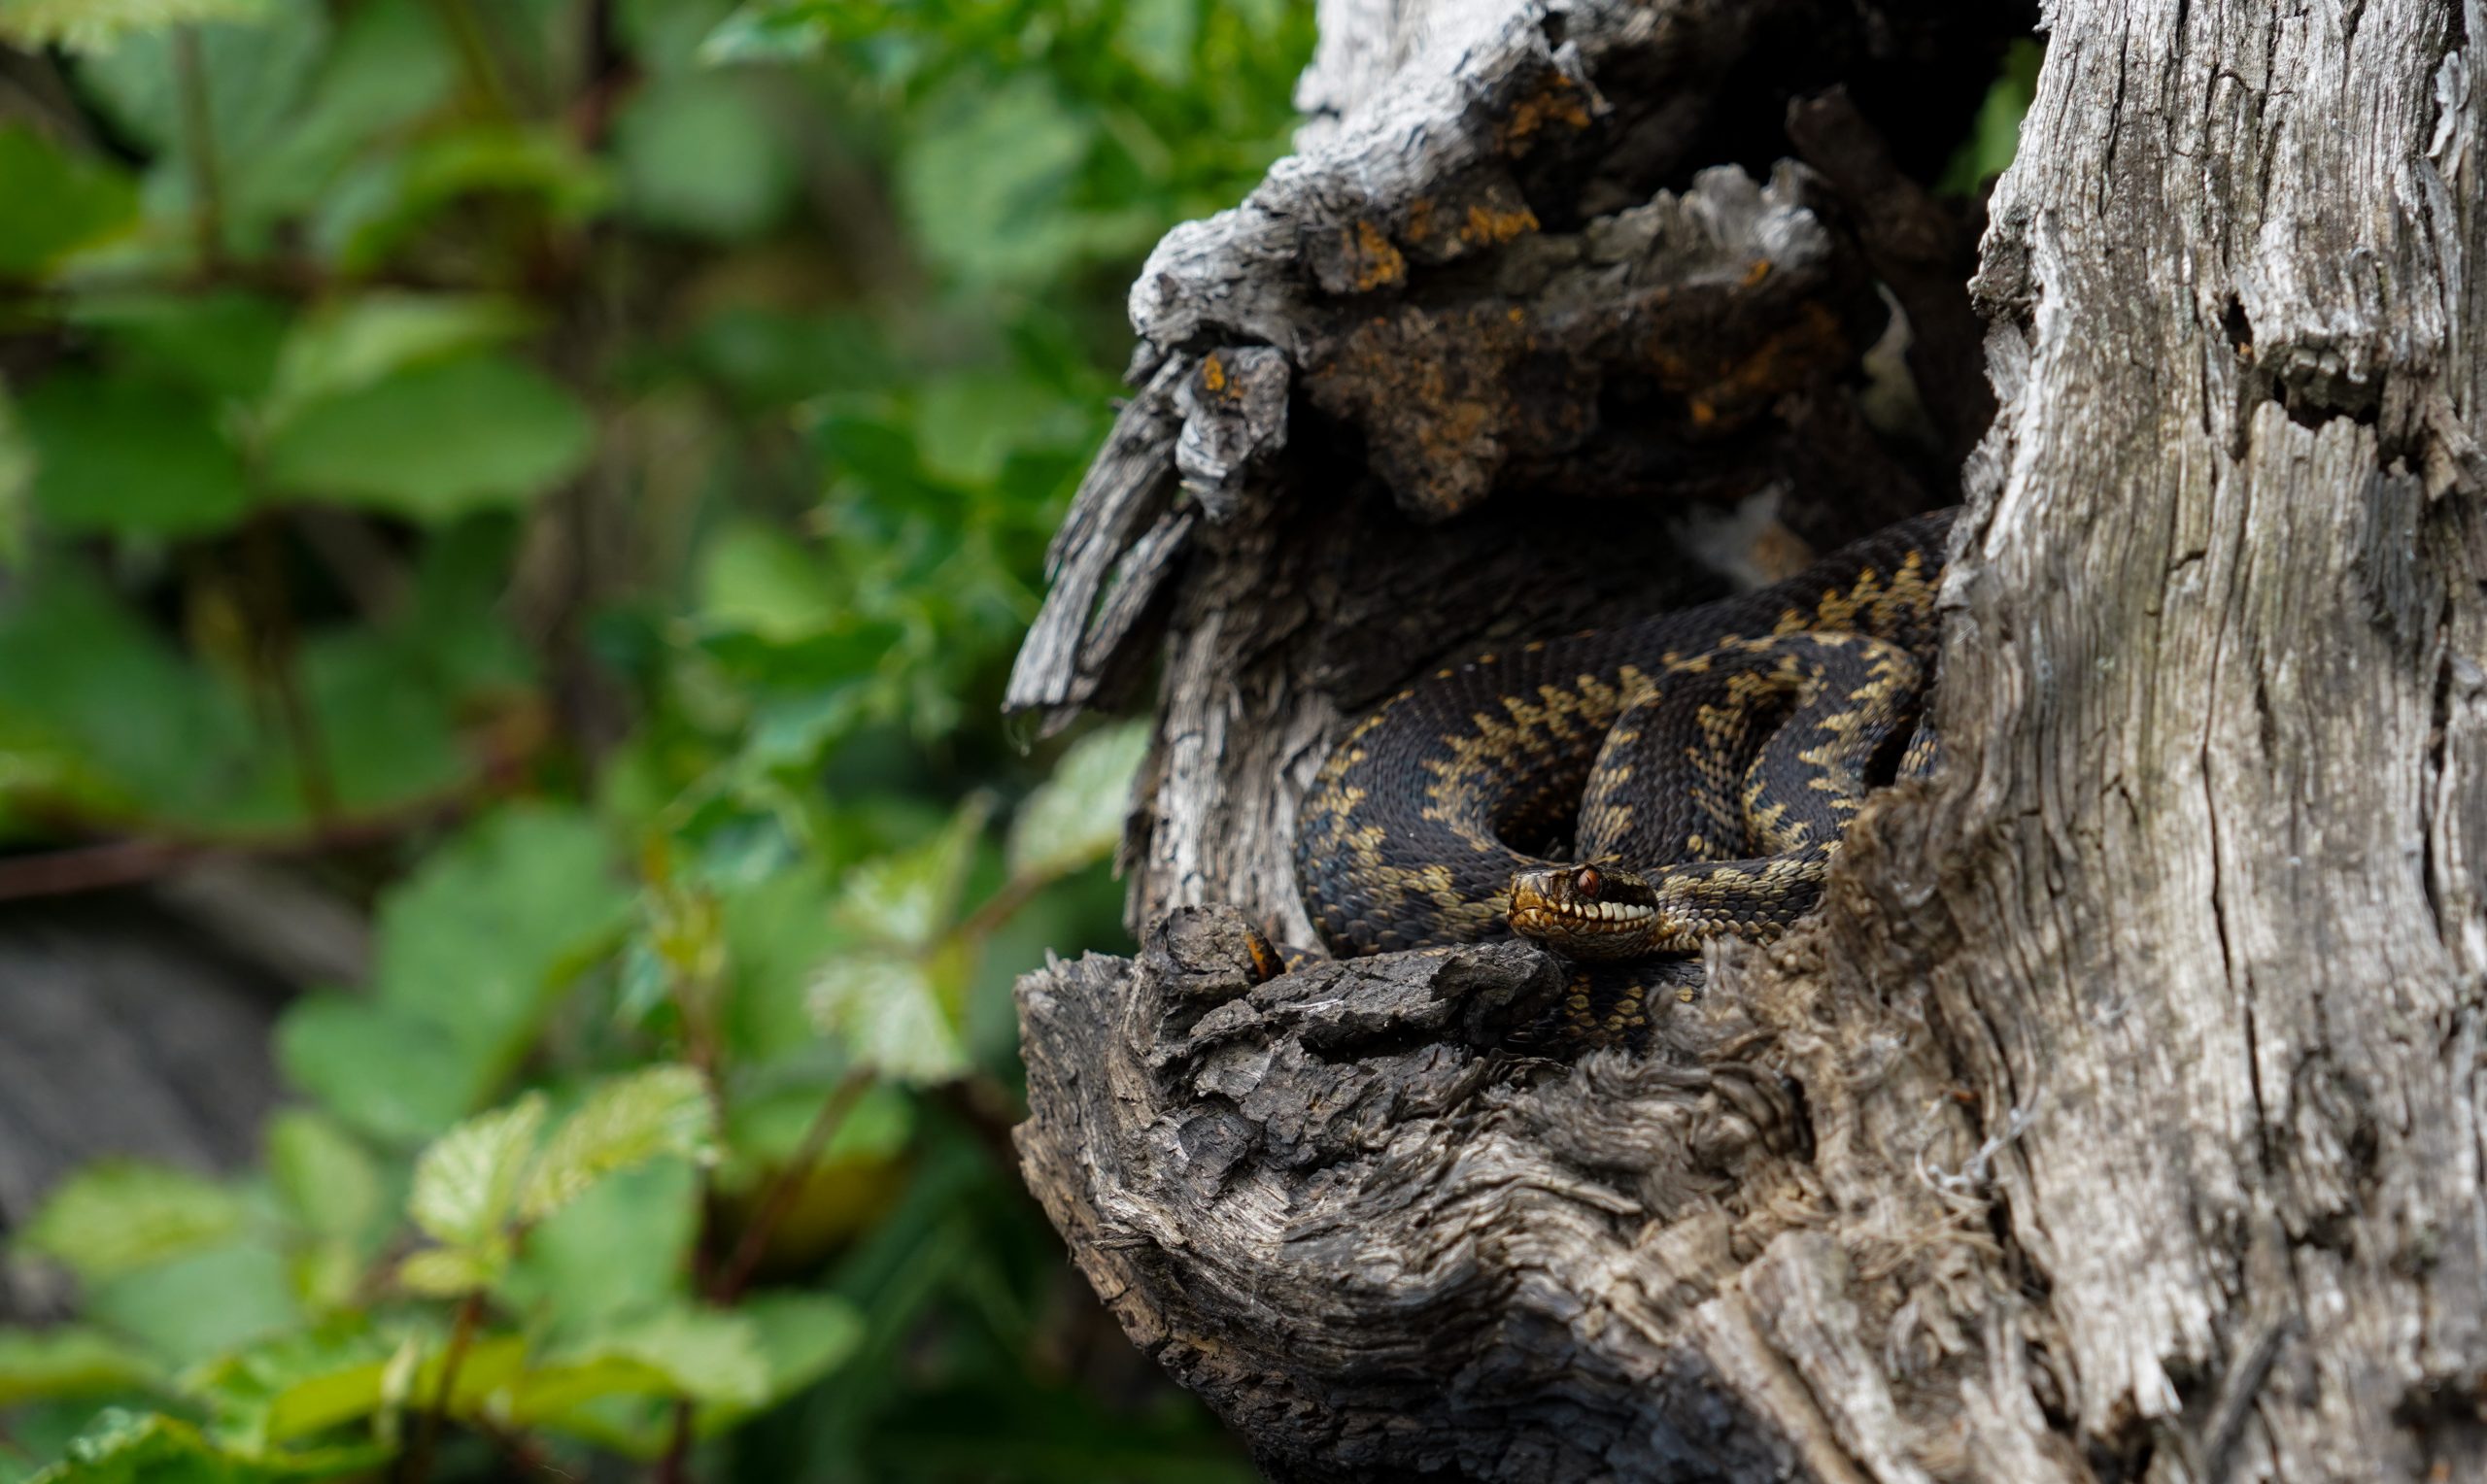 A resting adder (snake) within a hollow tree at Crowle Moors